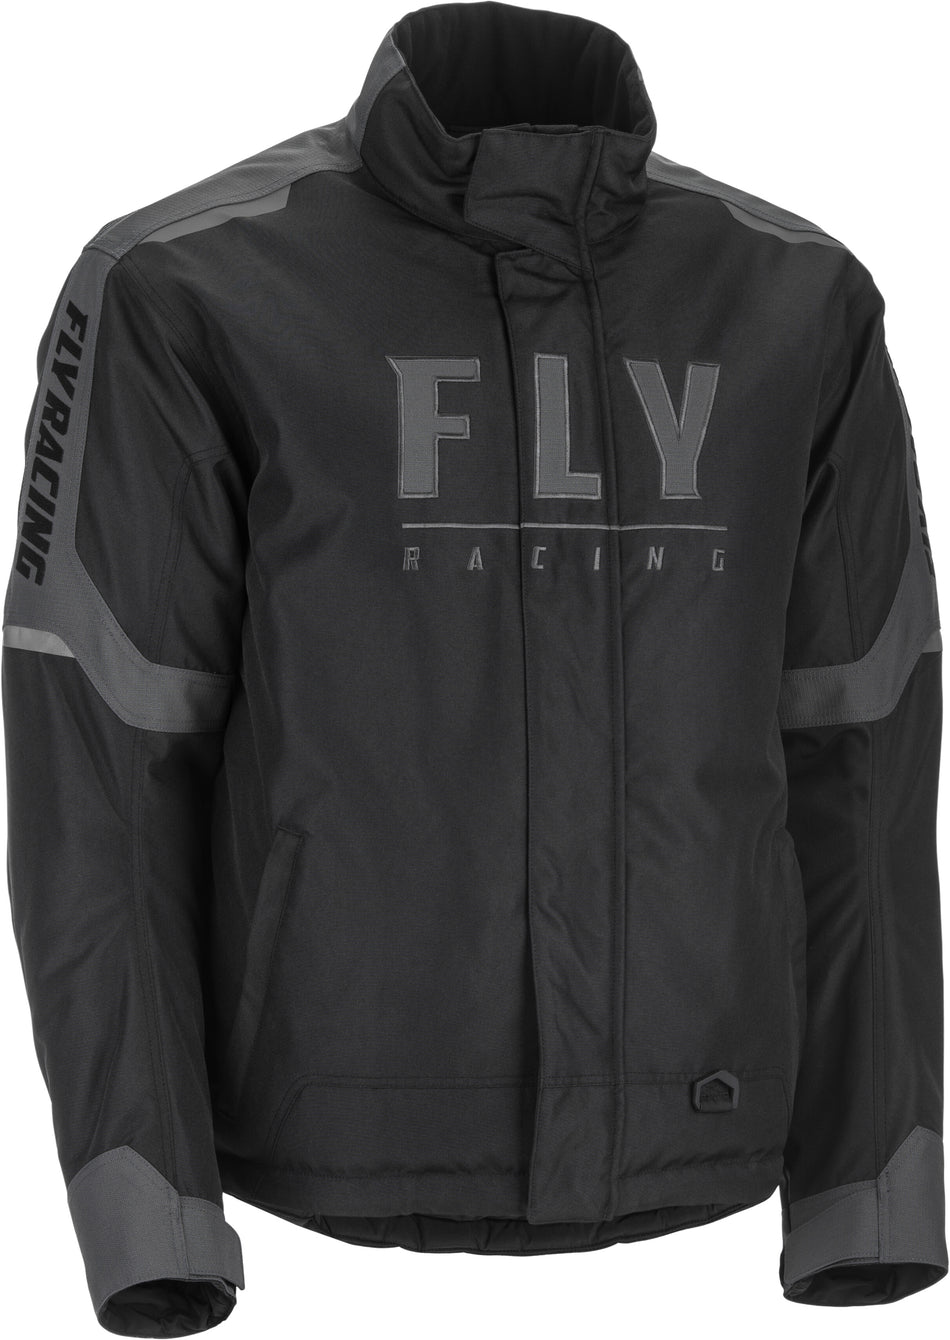 FLY RACING Outpost Jacket Black/Grey Lg 470-4140L